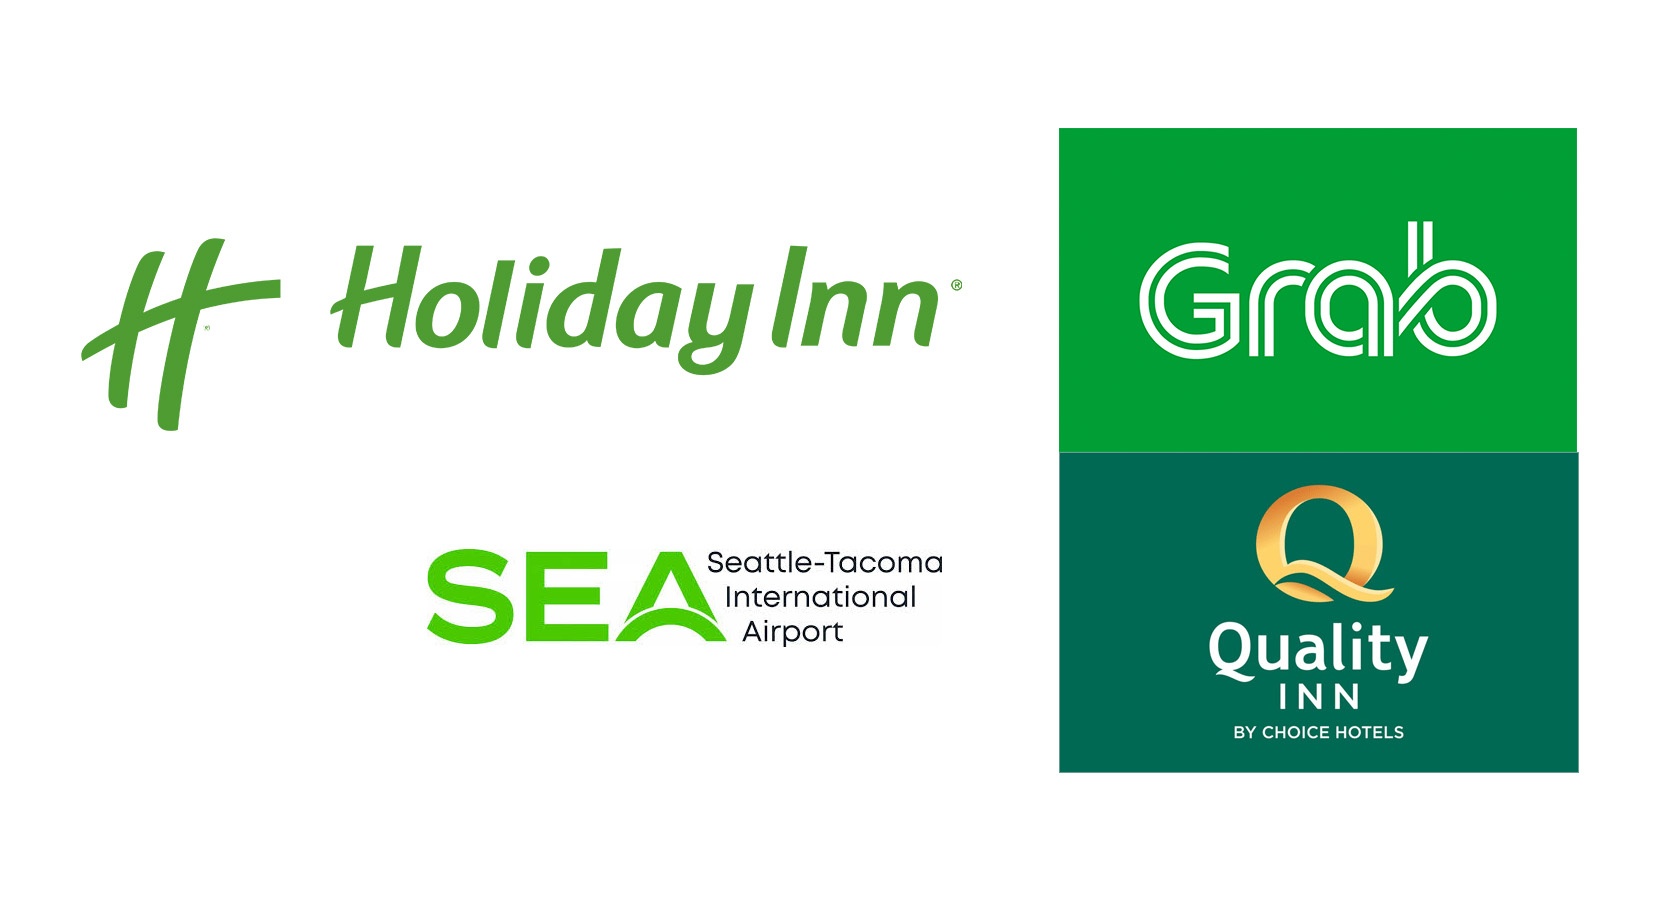 How hospitality brands use the color green in the logos and branding